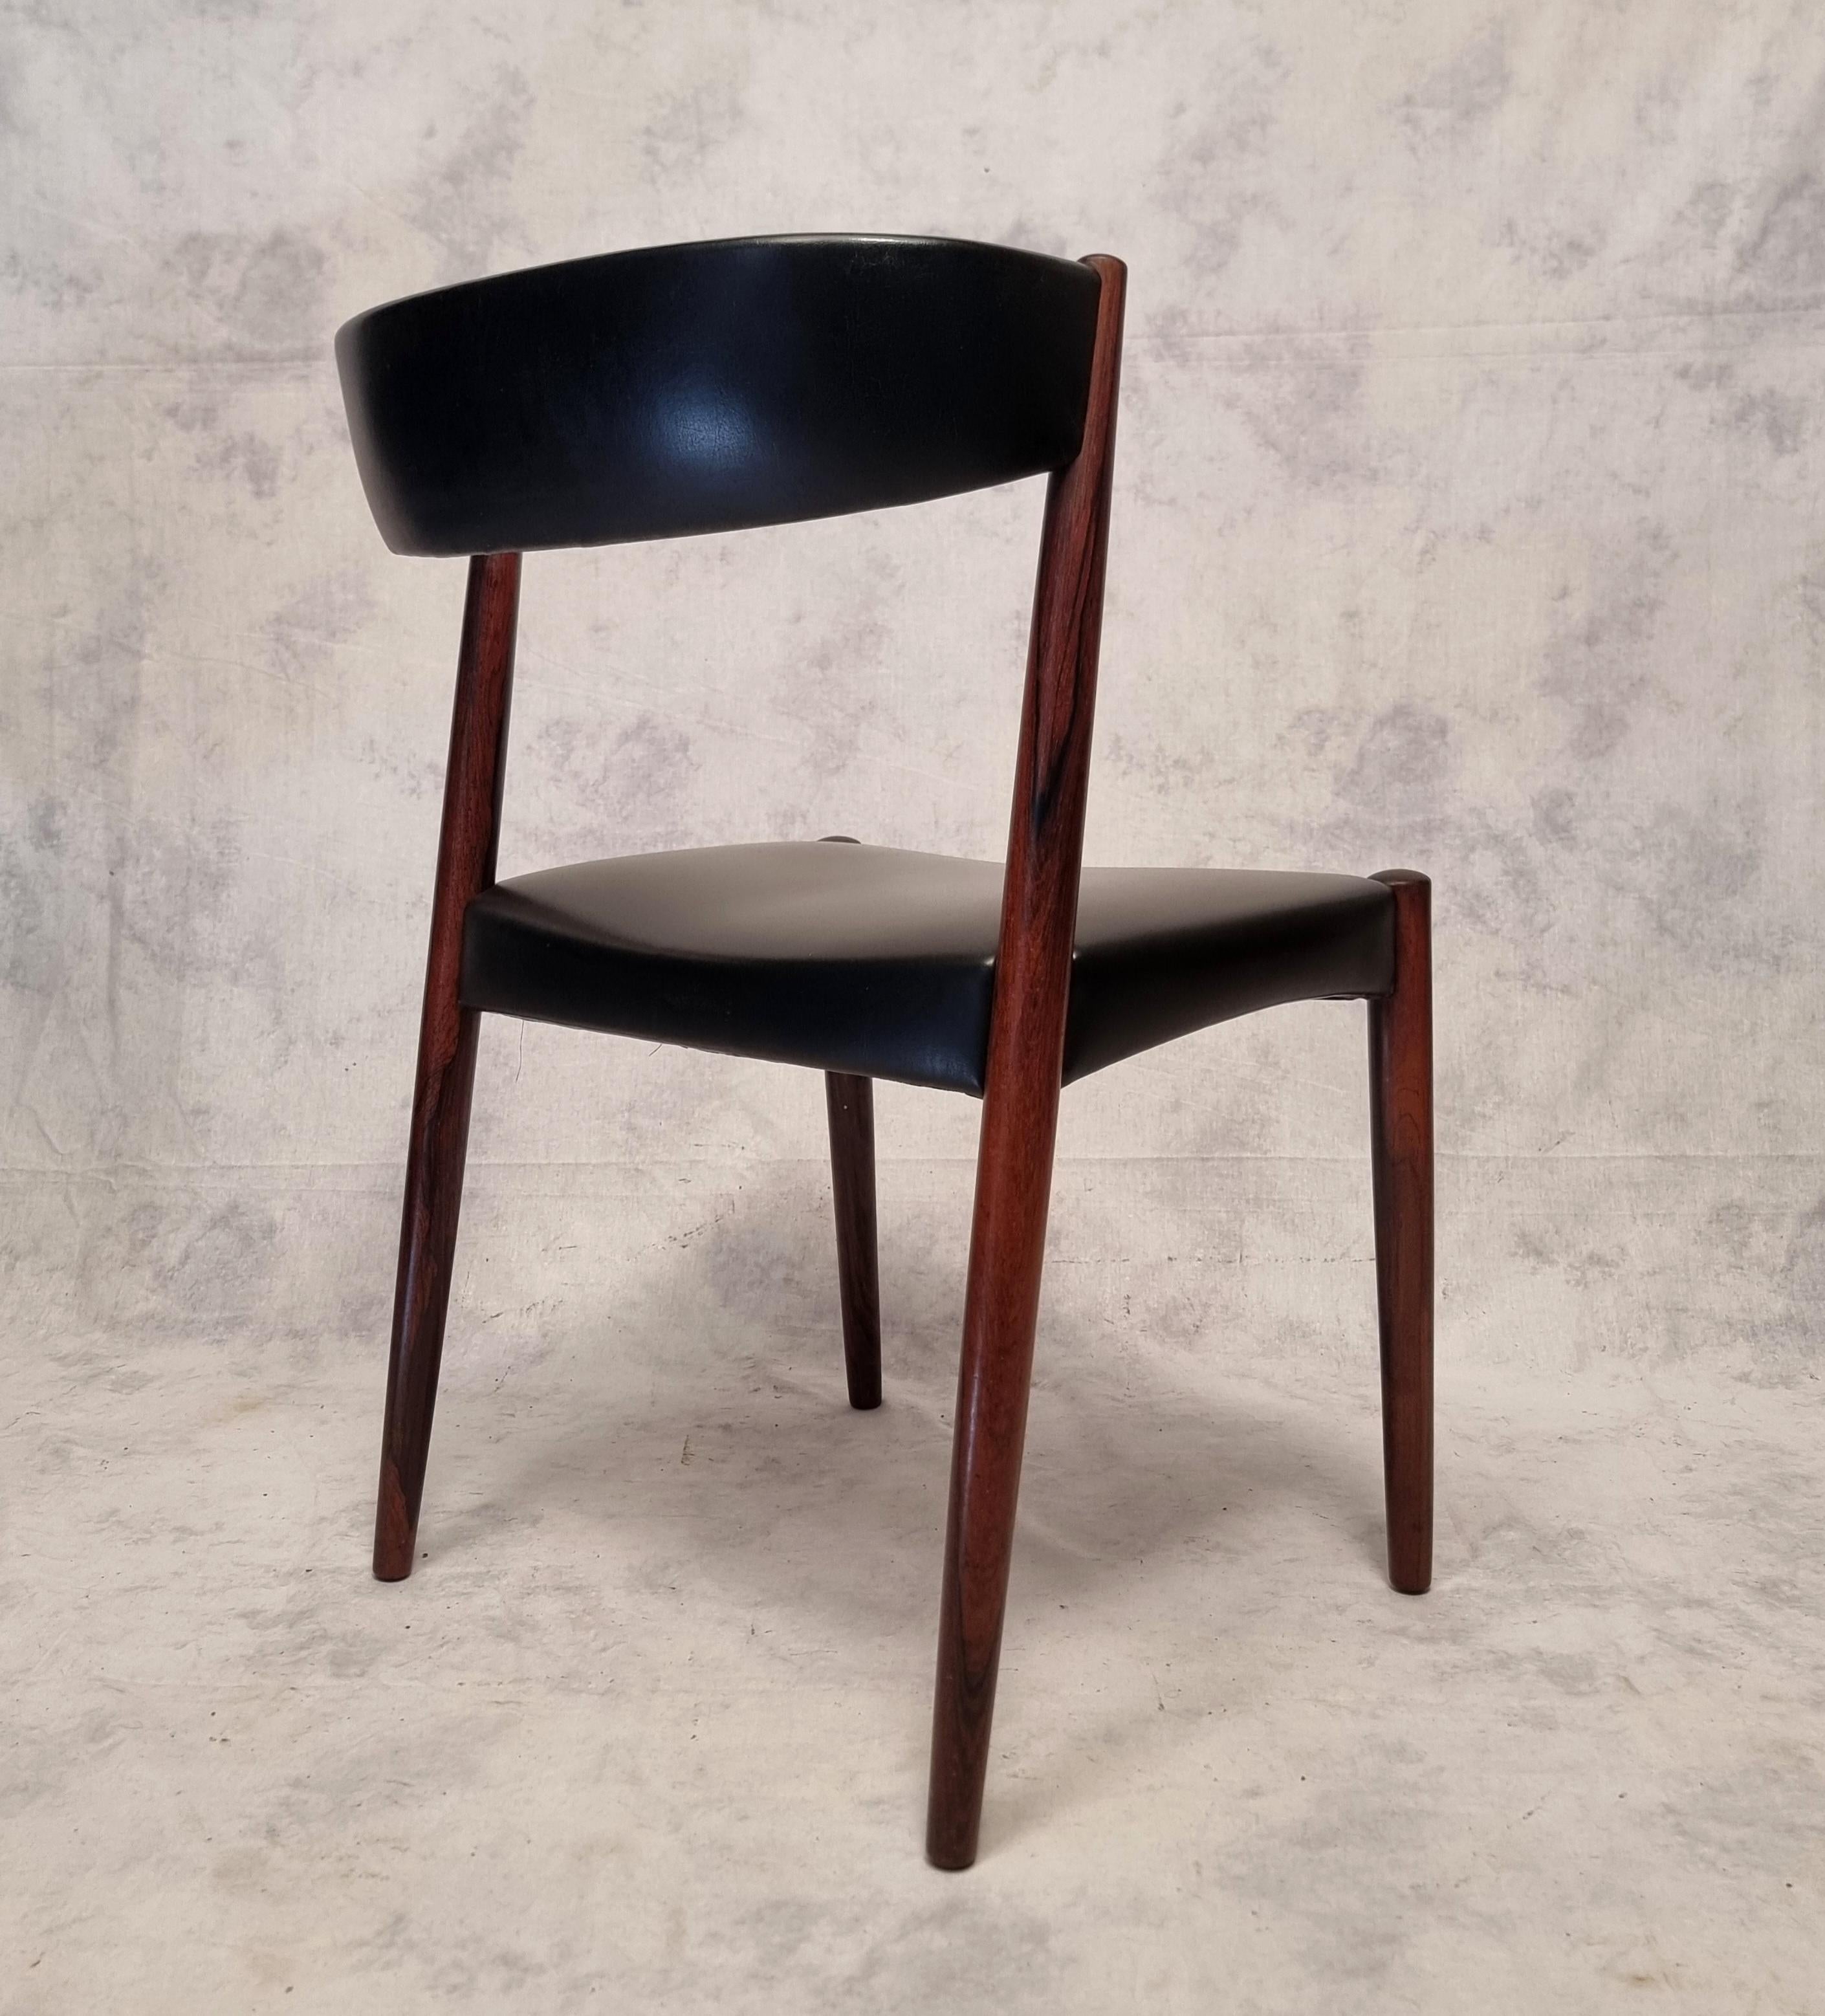 Series Of Four Scandinavian Chairs - Vejle Mobelfabrik - Rosewood - Ca 1960 For Sale 3